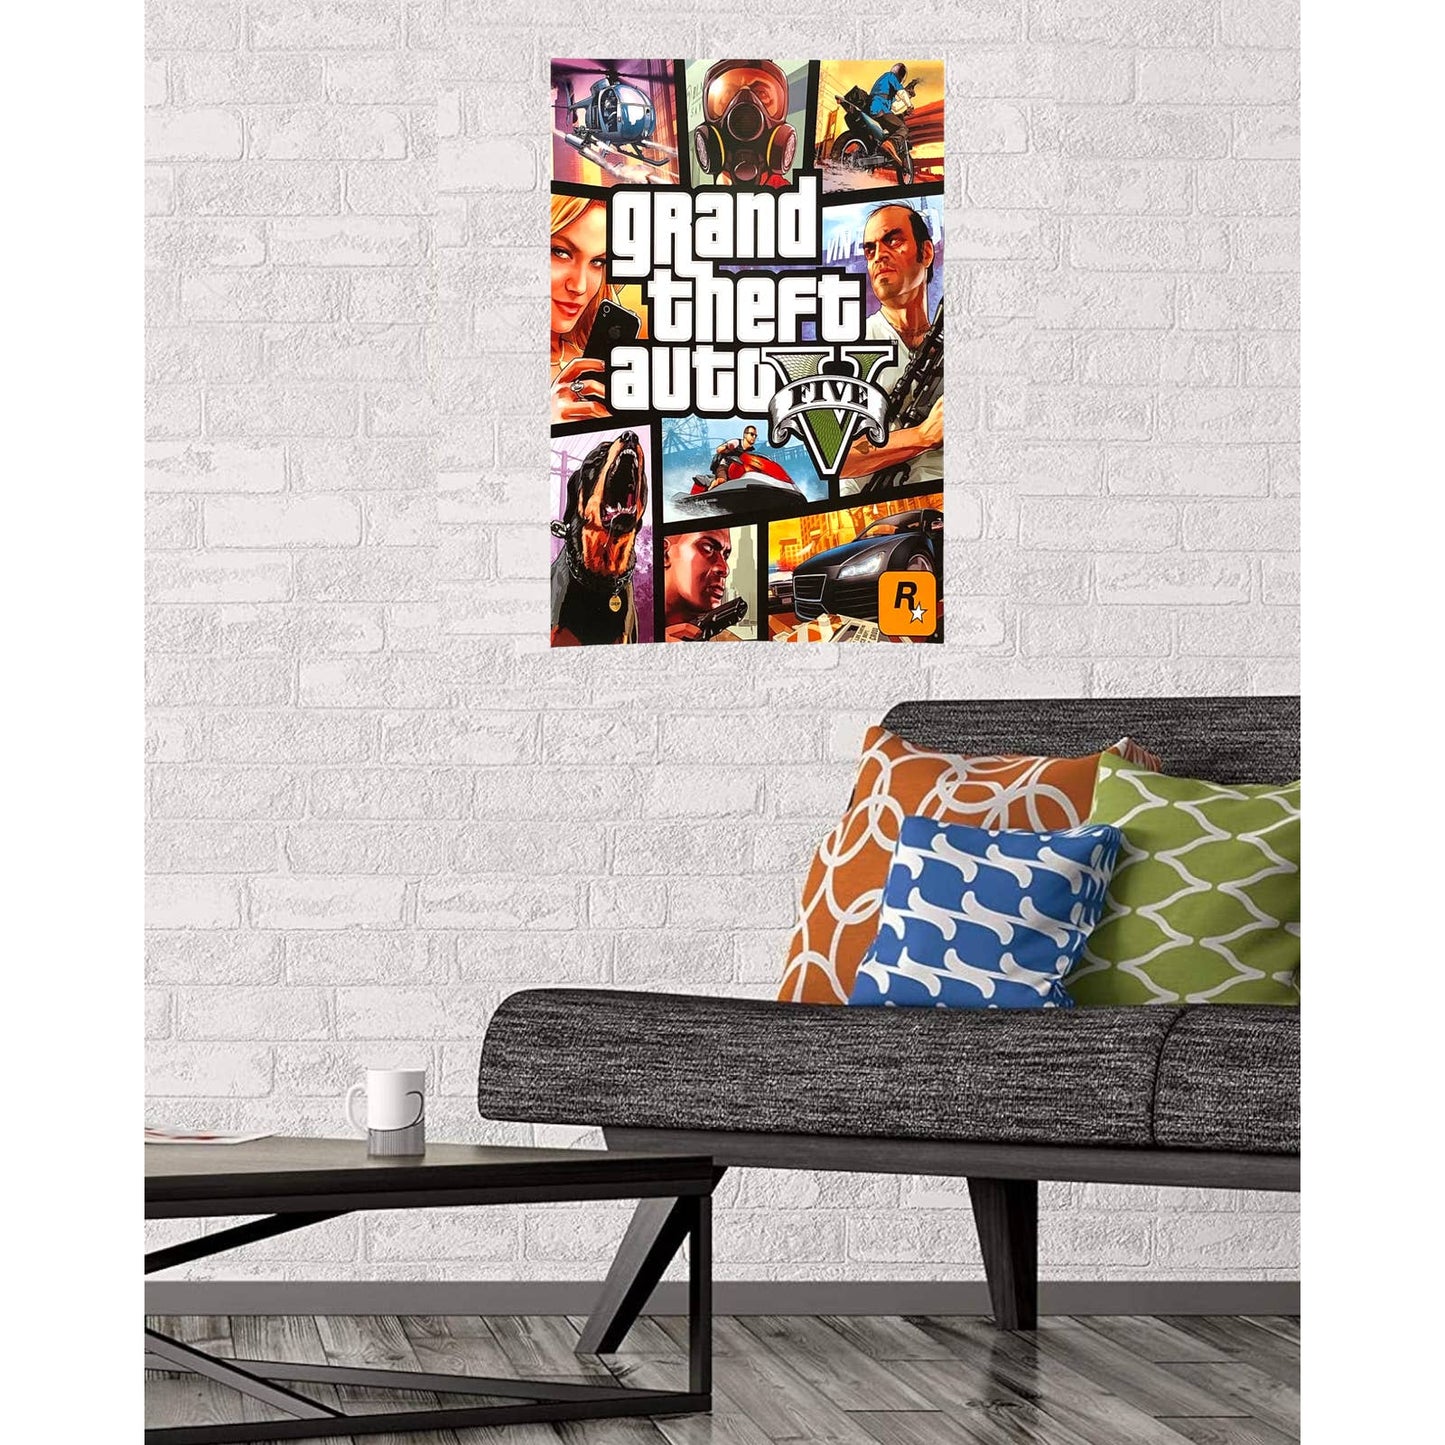 Grand Theft Auto 5 Video Game Poster Print Wall Art 16"x24"